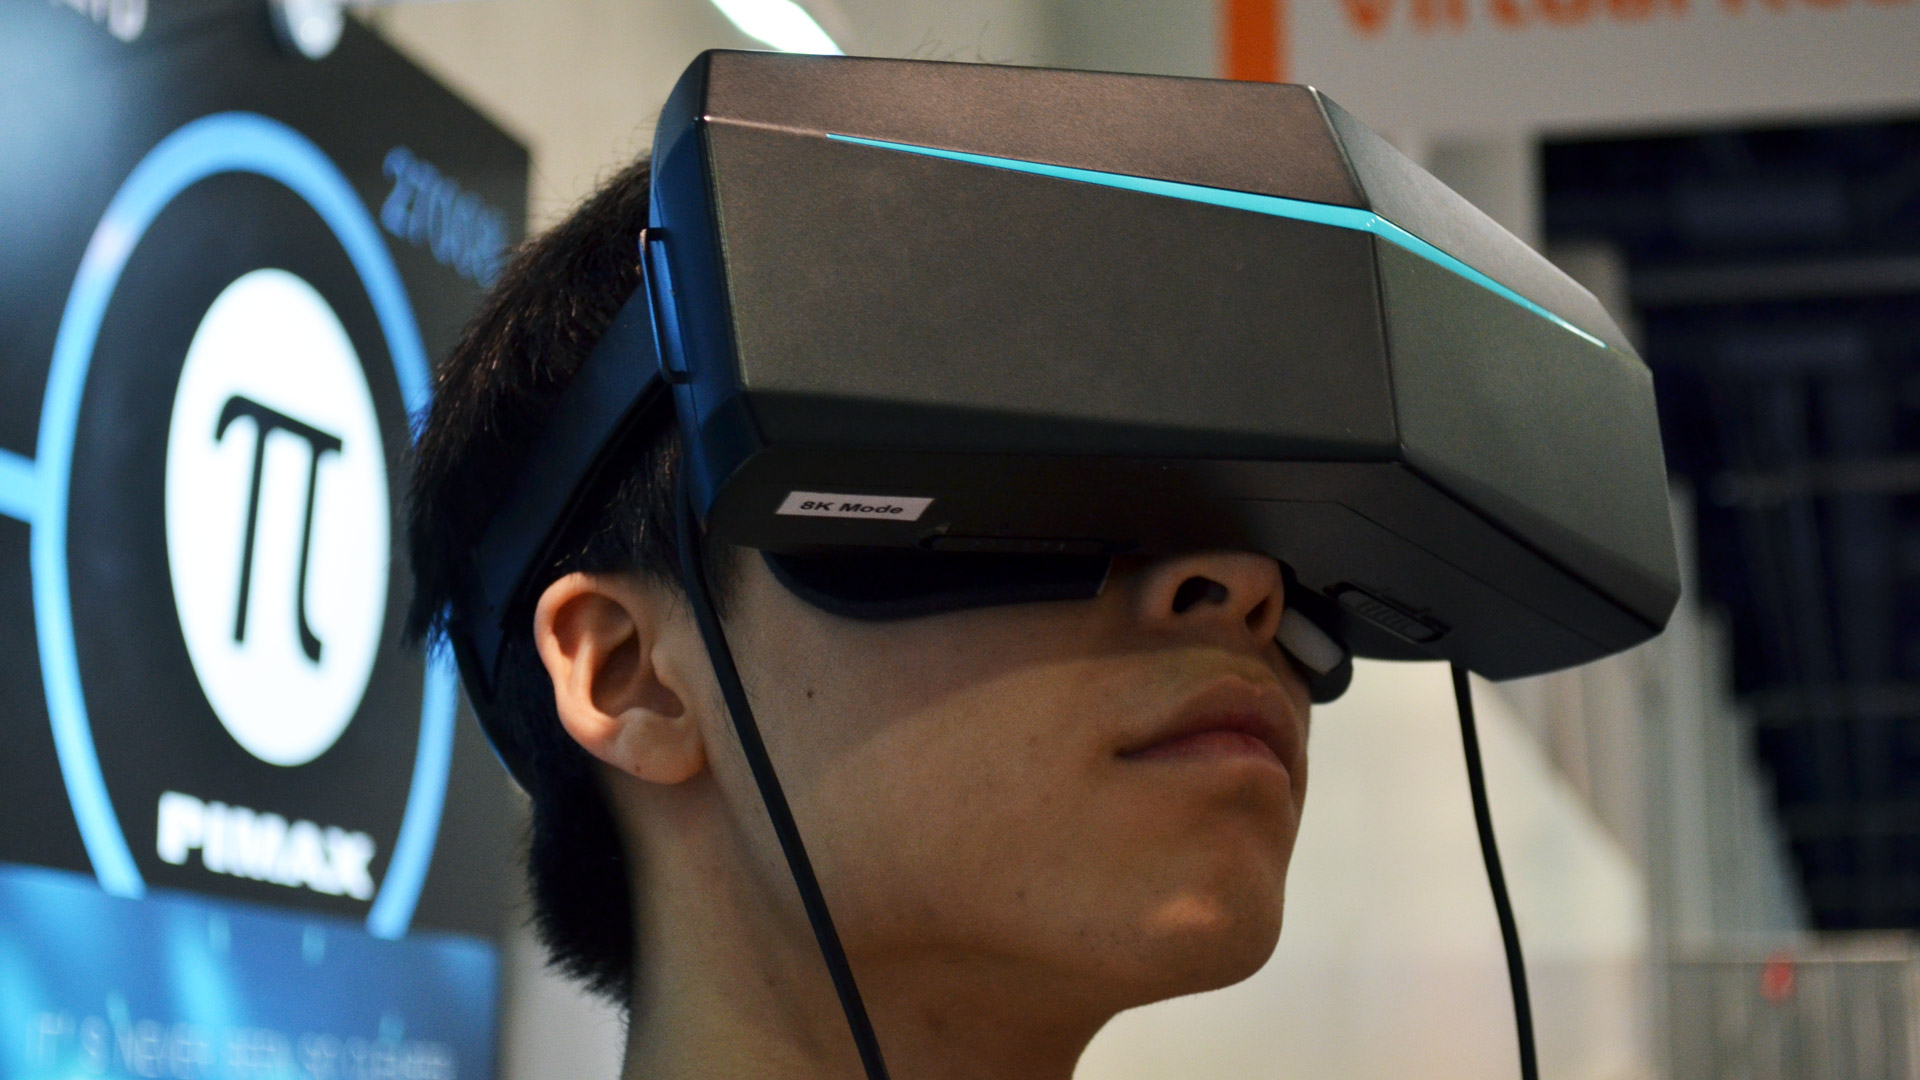 Hands-on: PiMAX's 8K Headset Proves that High FOV VR is Coming